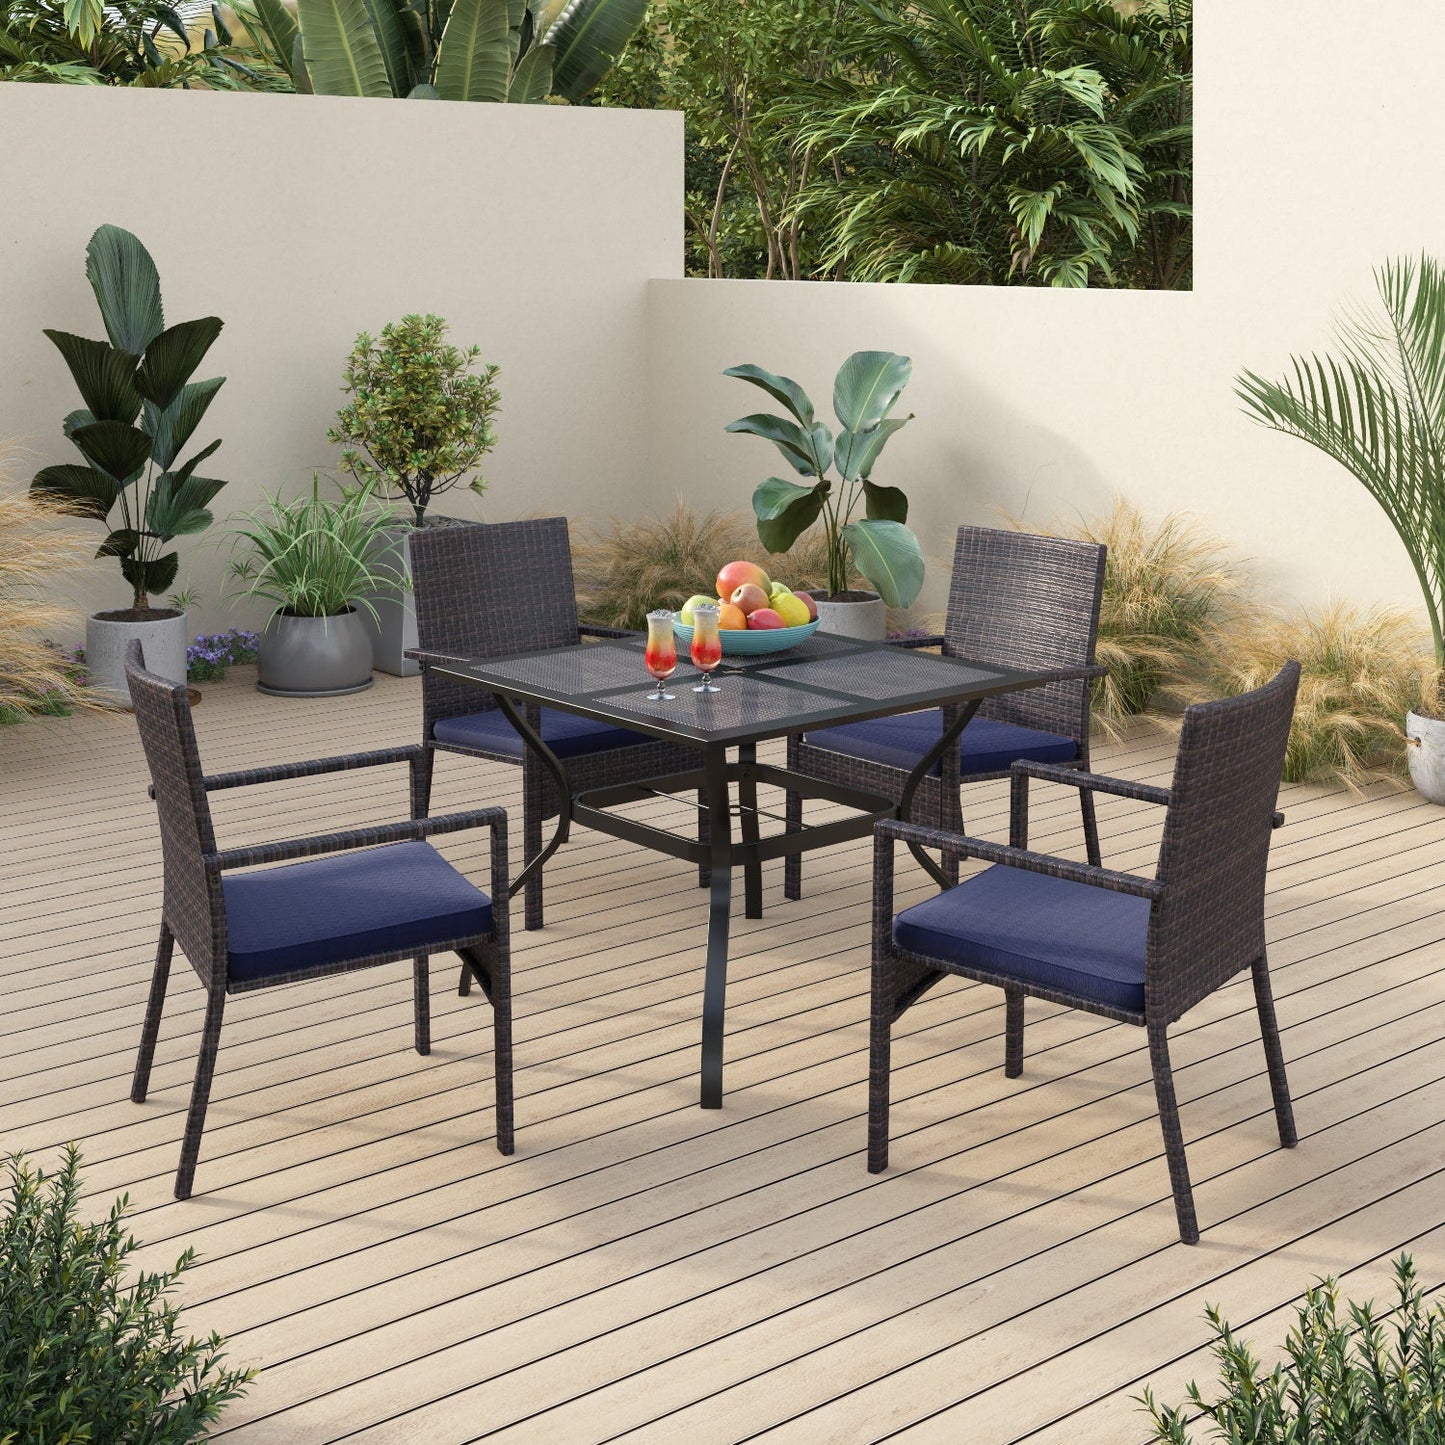 Sophia & William 5 Pieces Outdoor Patio Dining Set 4 Brown PE Rattan Chairs and Metal Dining Table